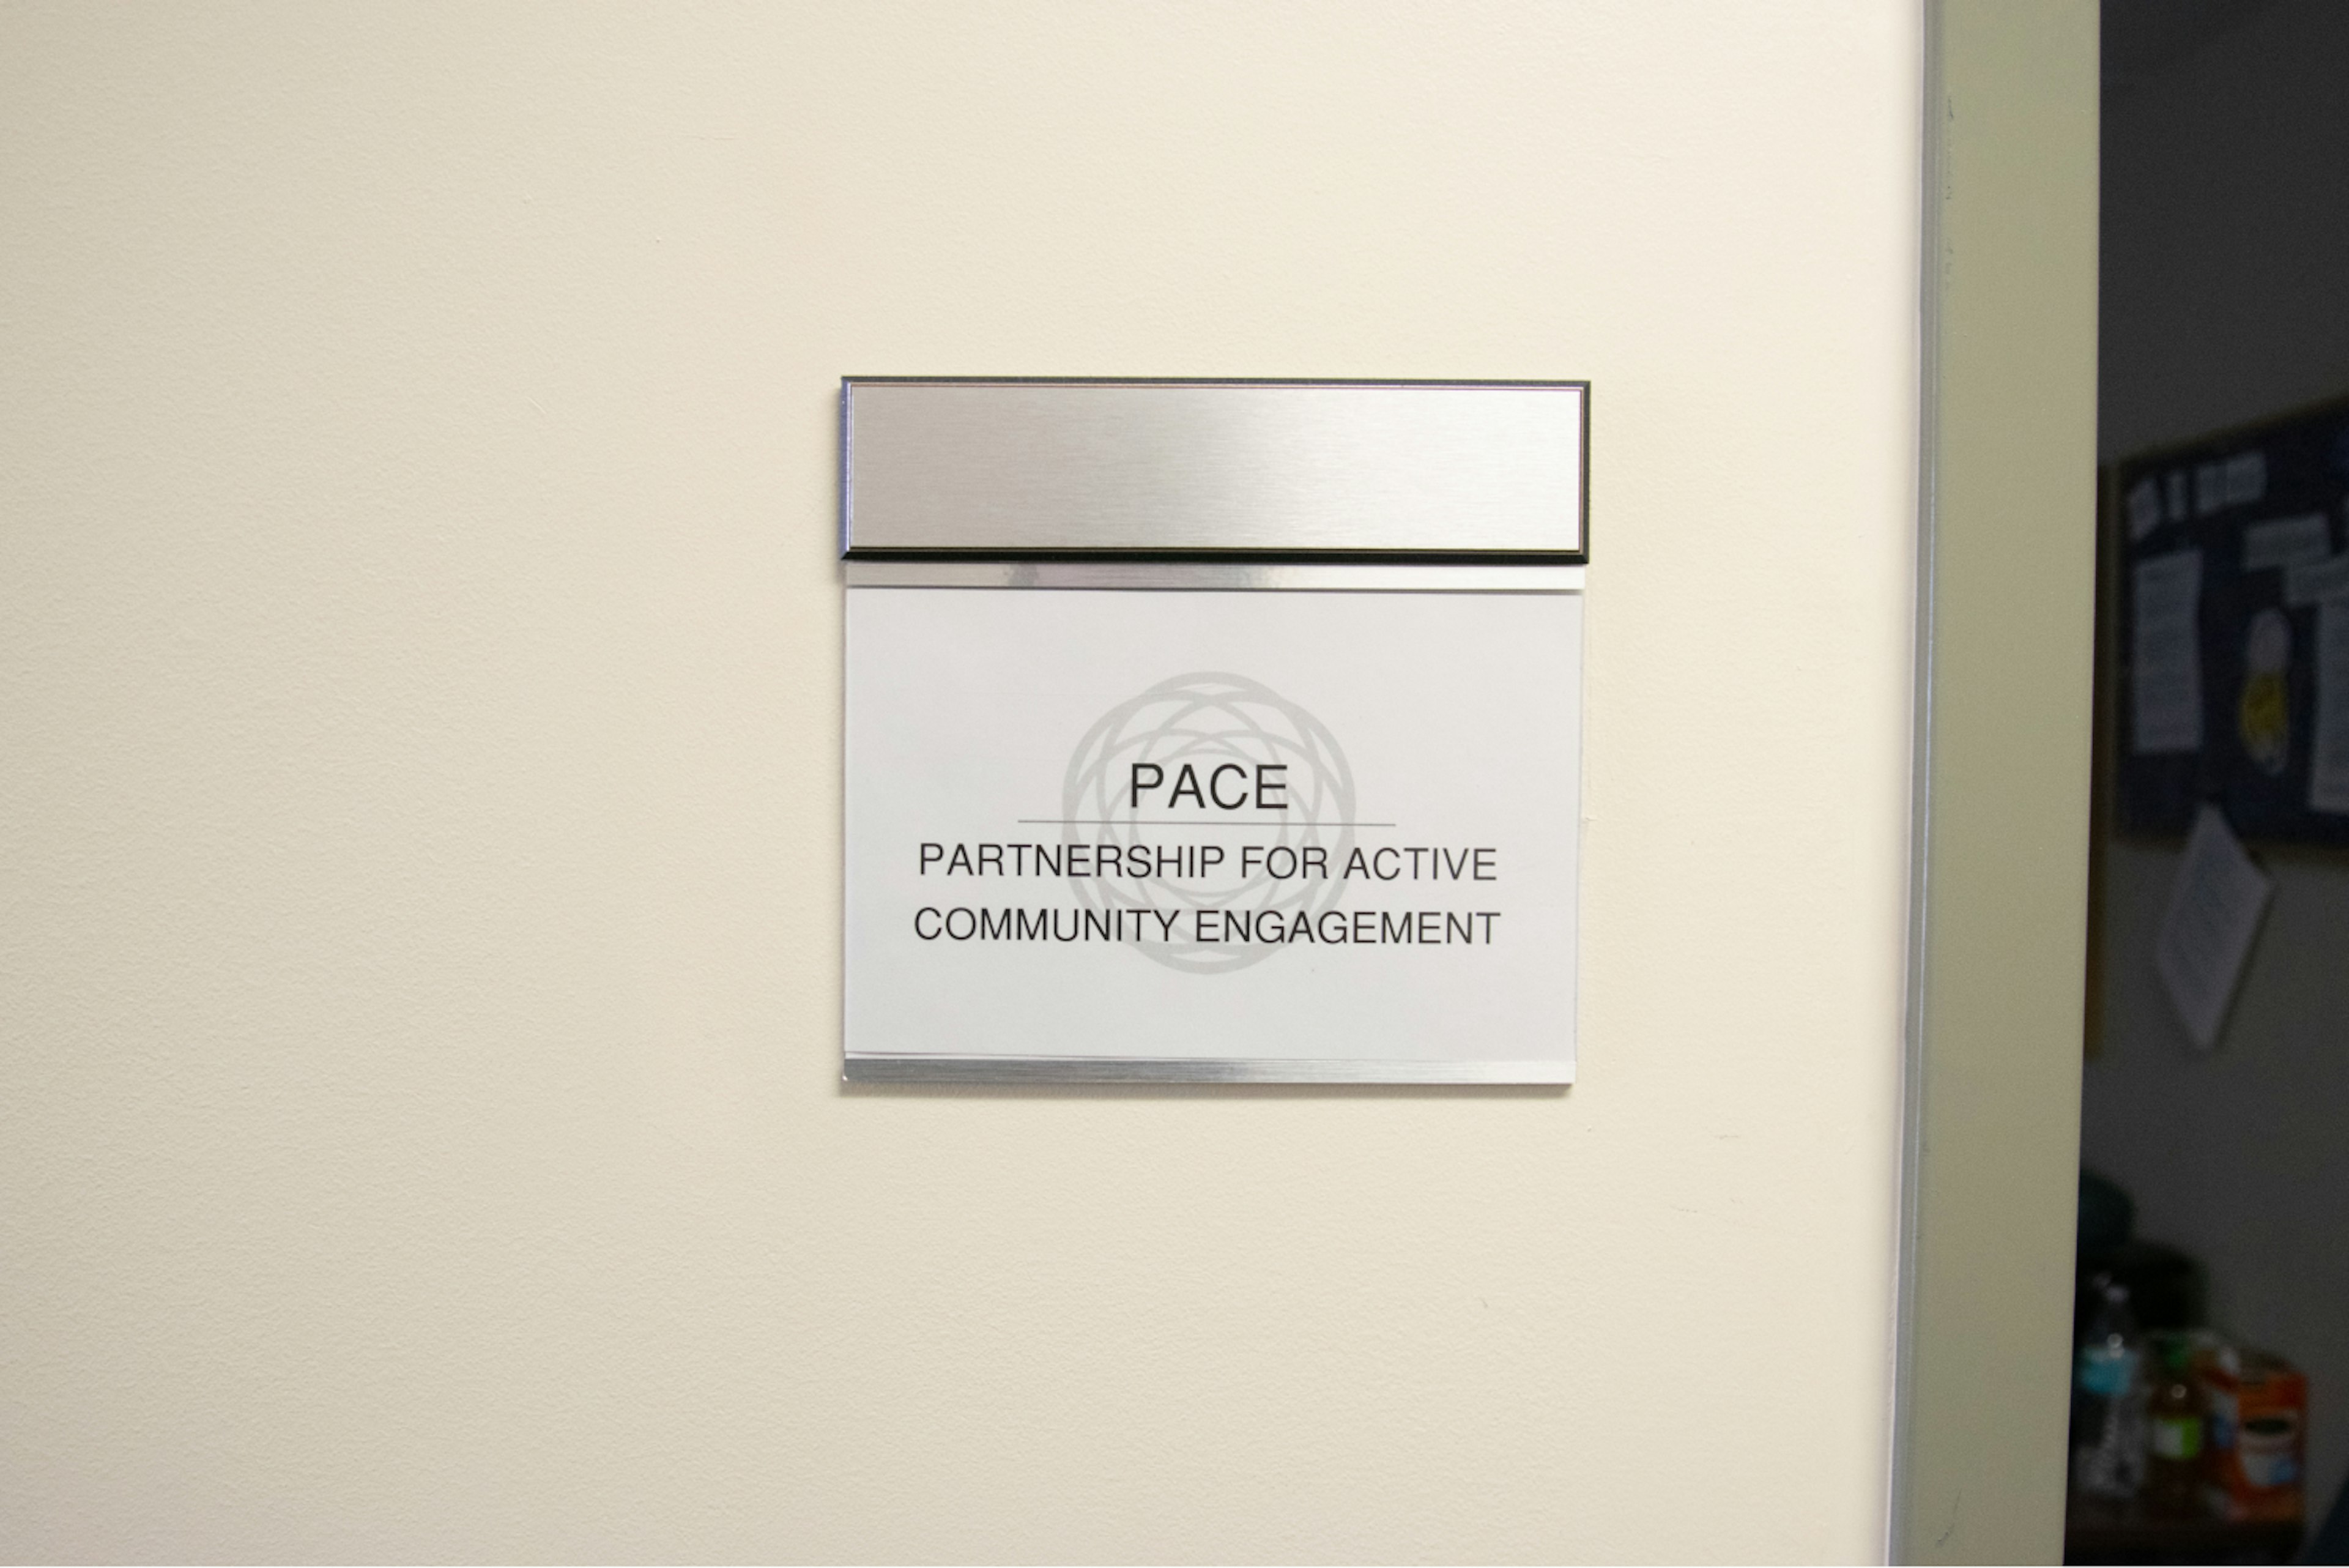 PACE: Partnership for Active Community Engagement door sign.